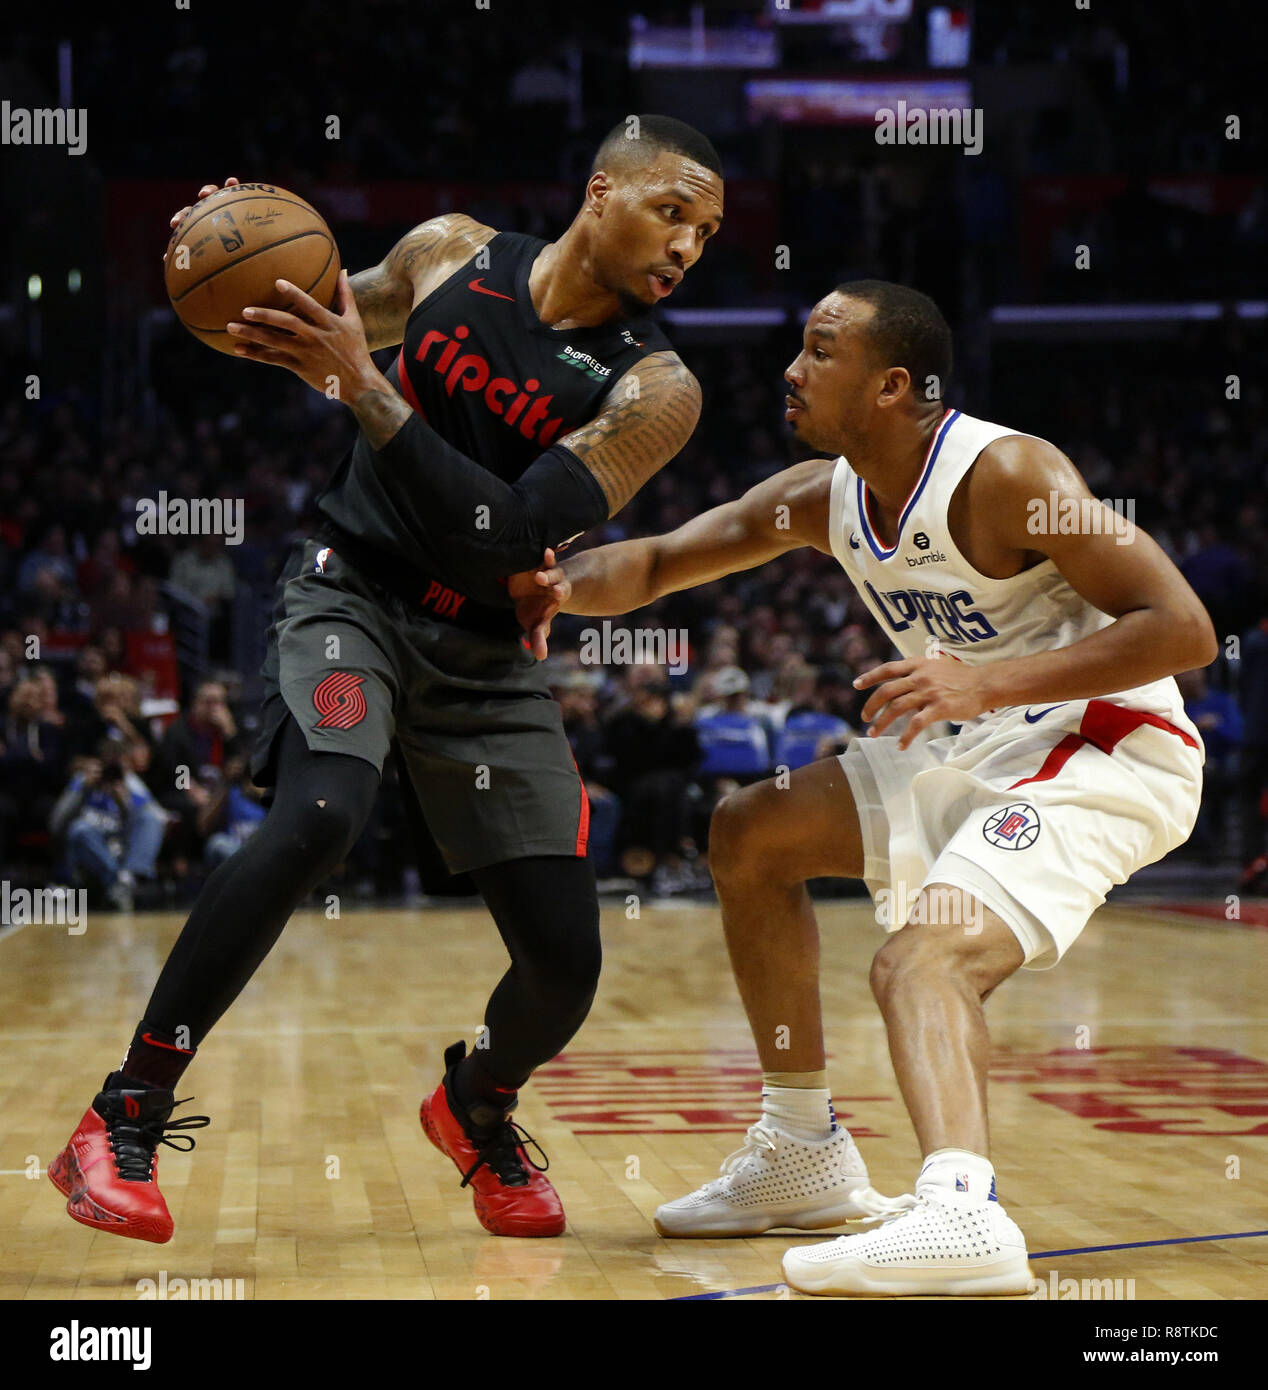 Los Angeles, California, USA. 17th Dec, 2018. Portland Trail Blazers'  Damian Lillard (0) is defended by Los Angeles Clippers' Avery Bradley (11)  in an NBA basketball game between Los Angeles Clippers and